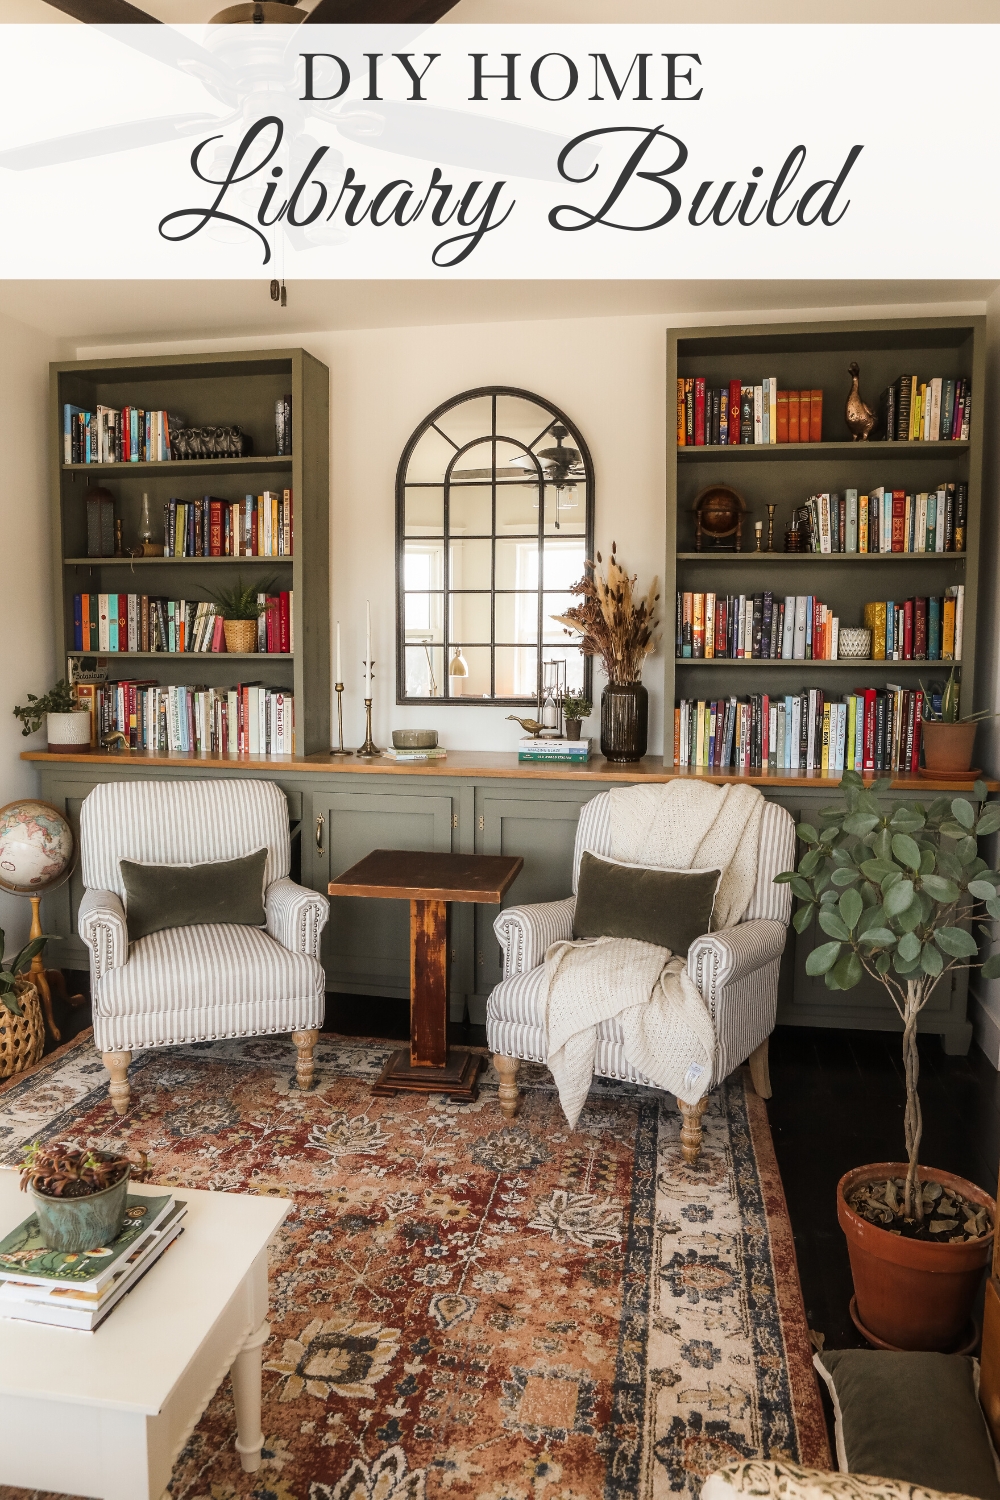 DIY Home Library Build with DIY Bookshelves